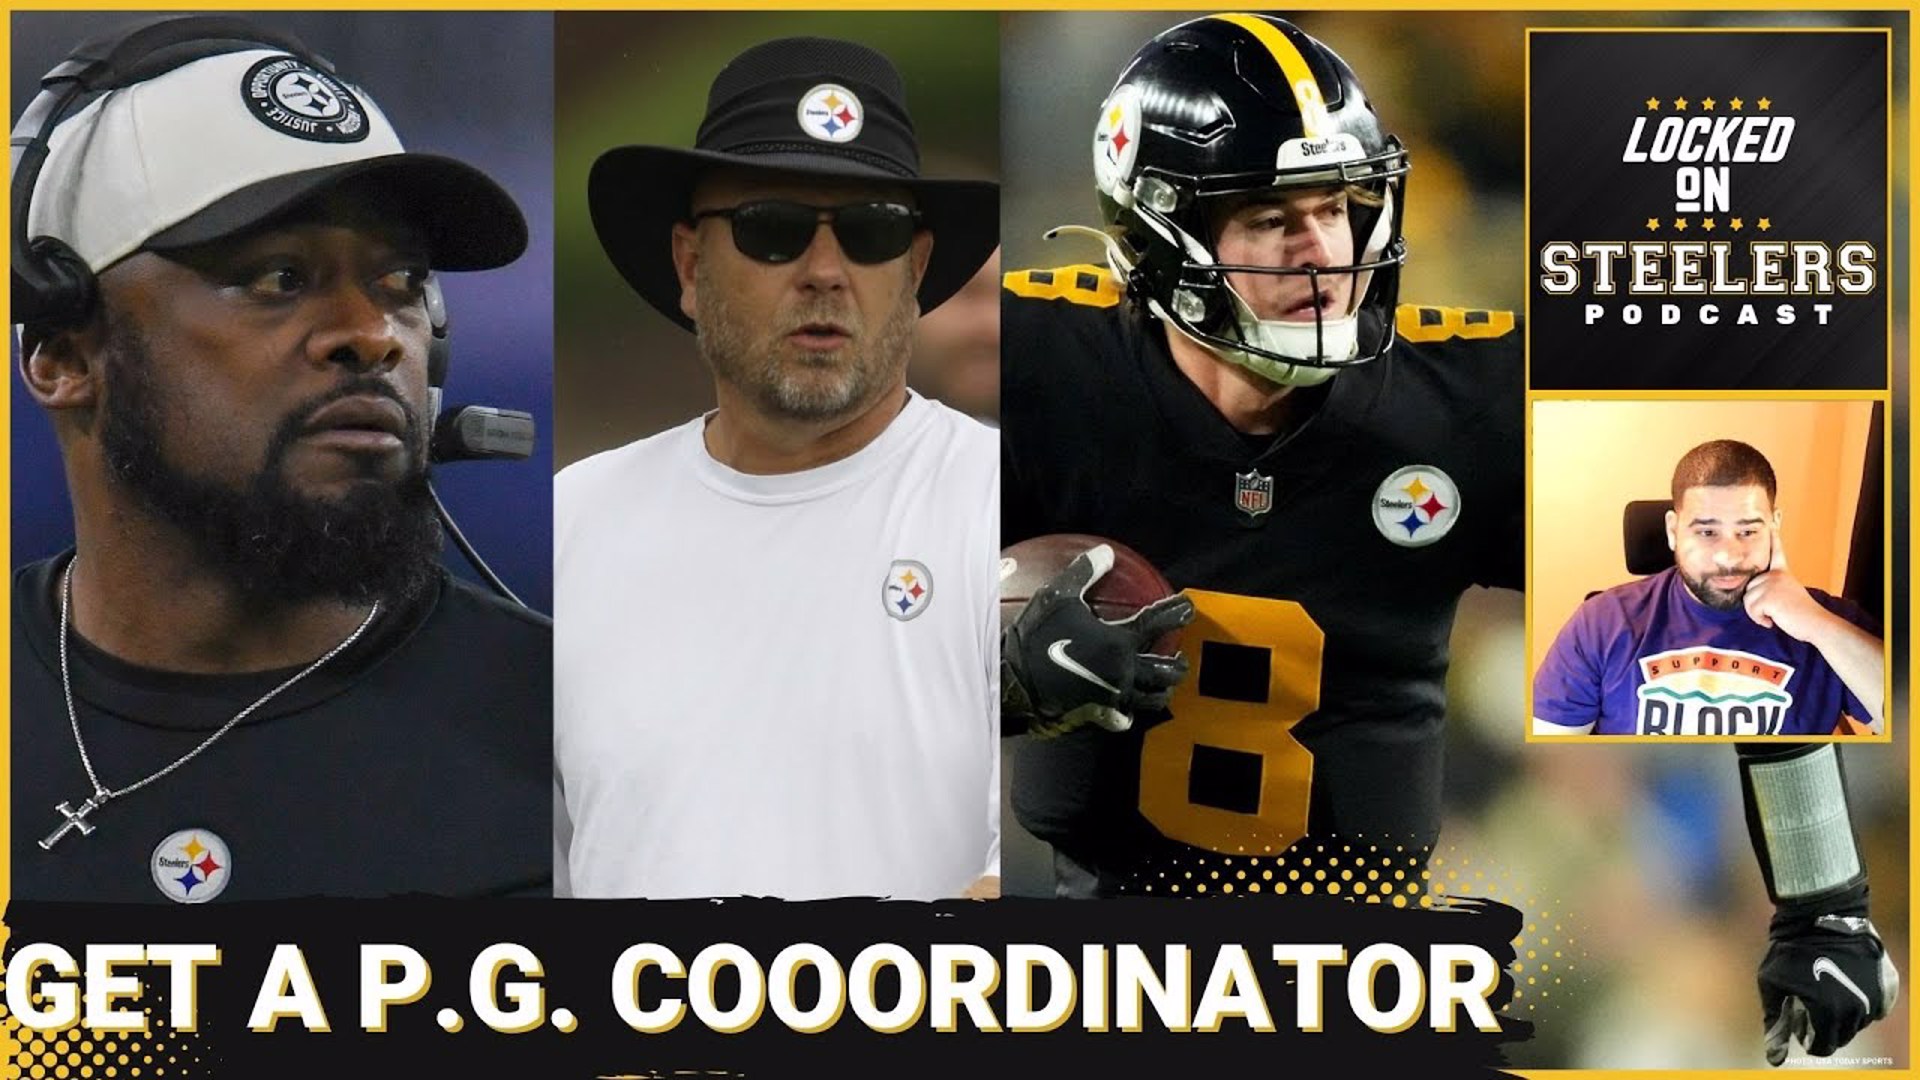 The possibility of hiring a passing game coordinator is still on the table, and Mike Tomlin should look to that as an opportunity to help develop the offense.